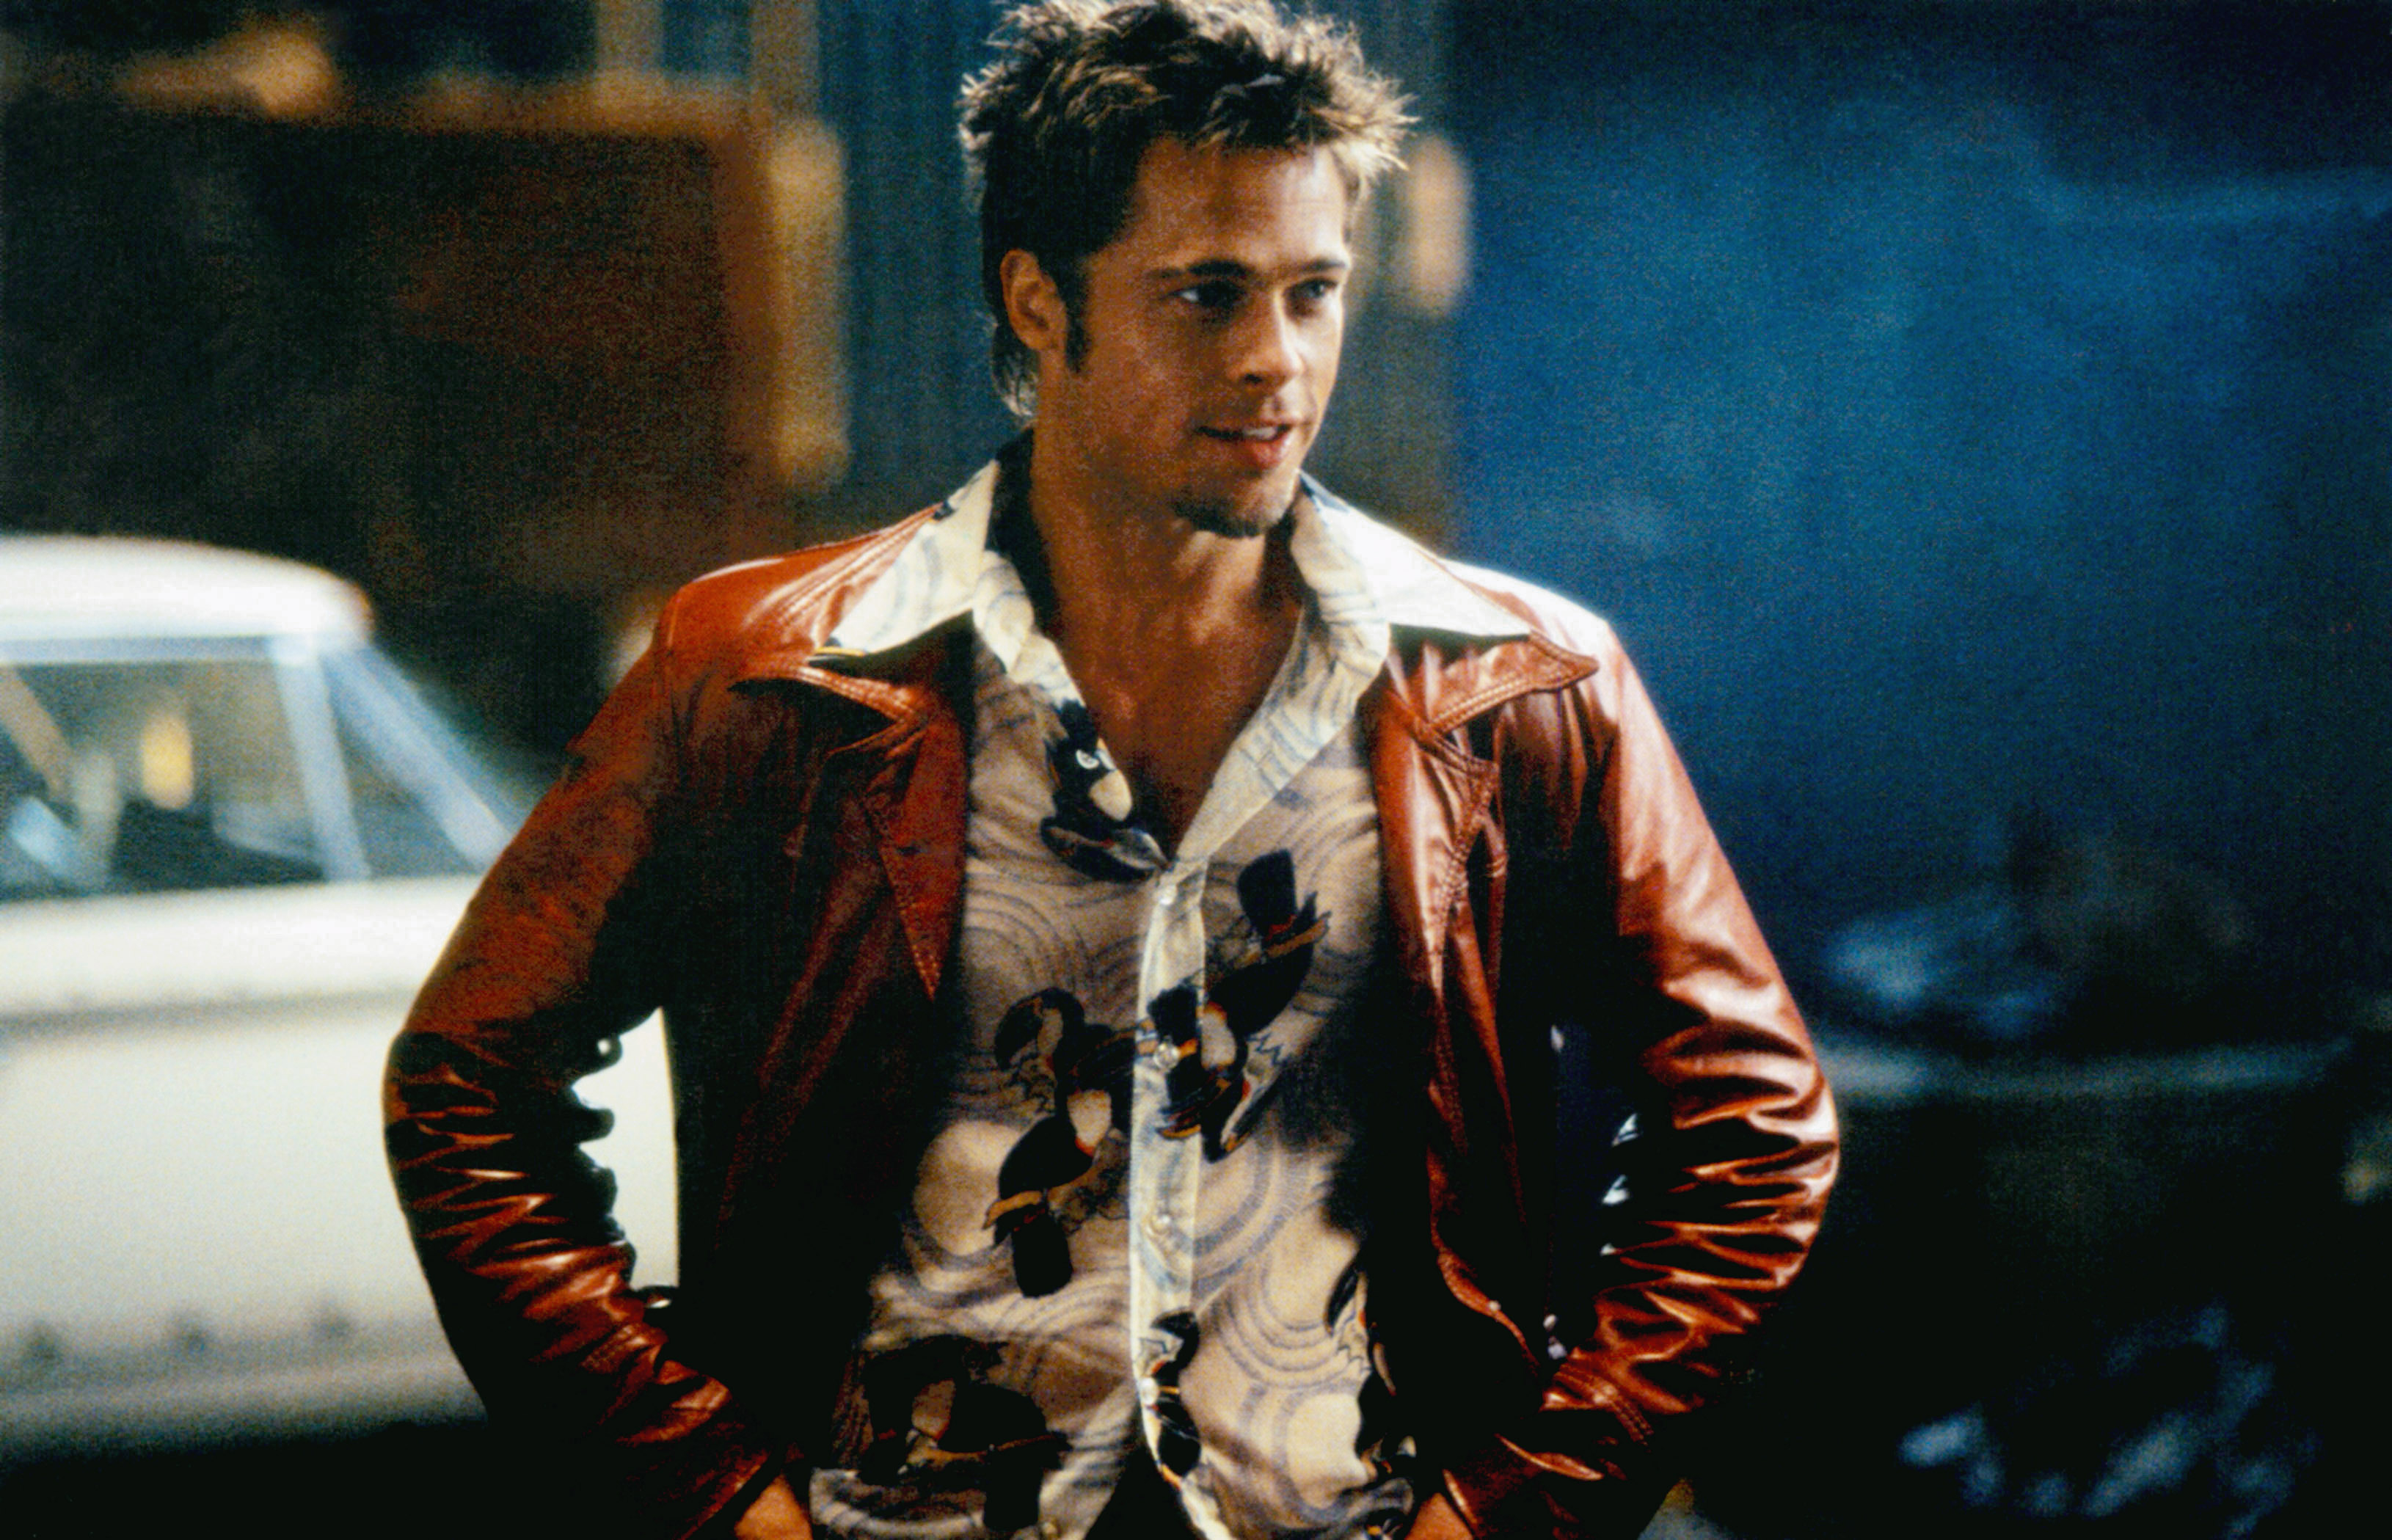 Tyler Durden from Fight Club in a leather jacket and printed shirt